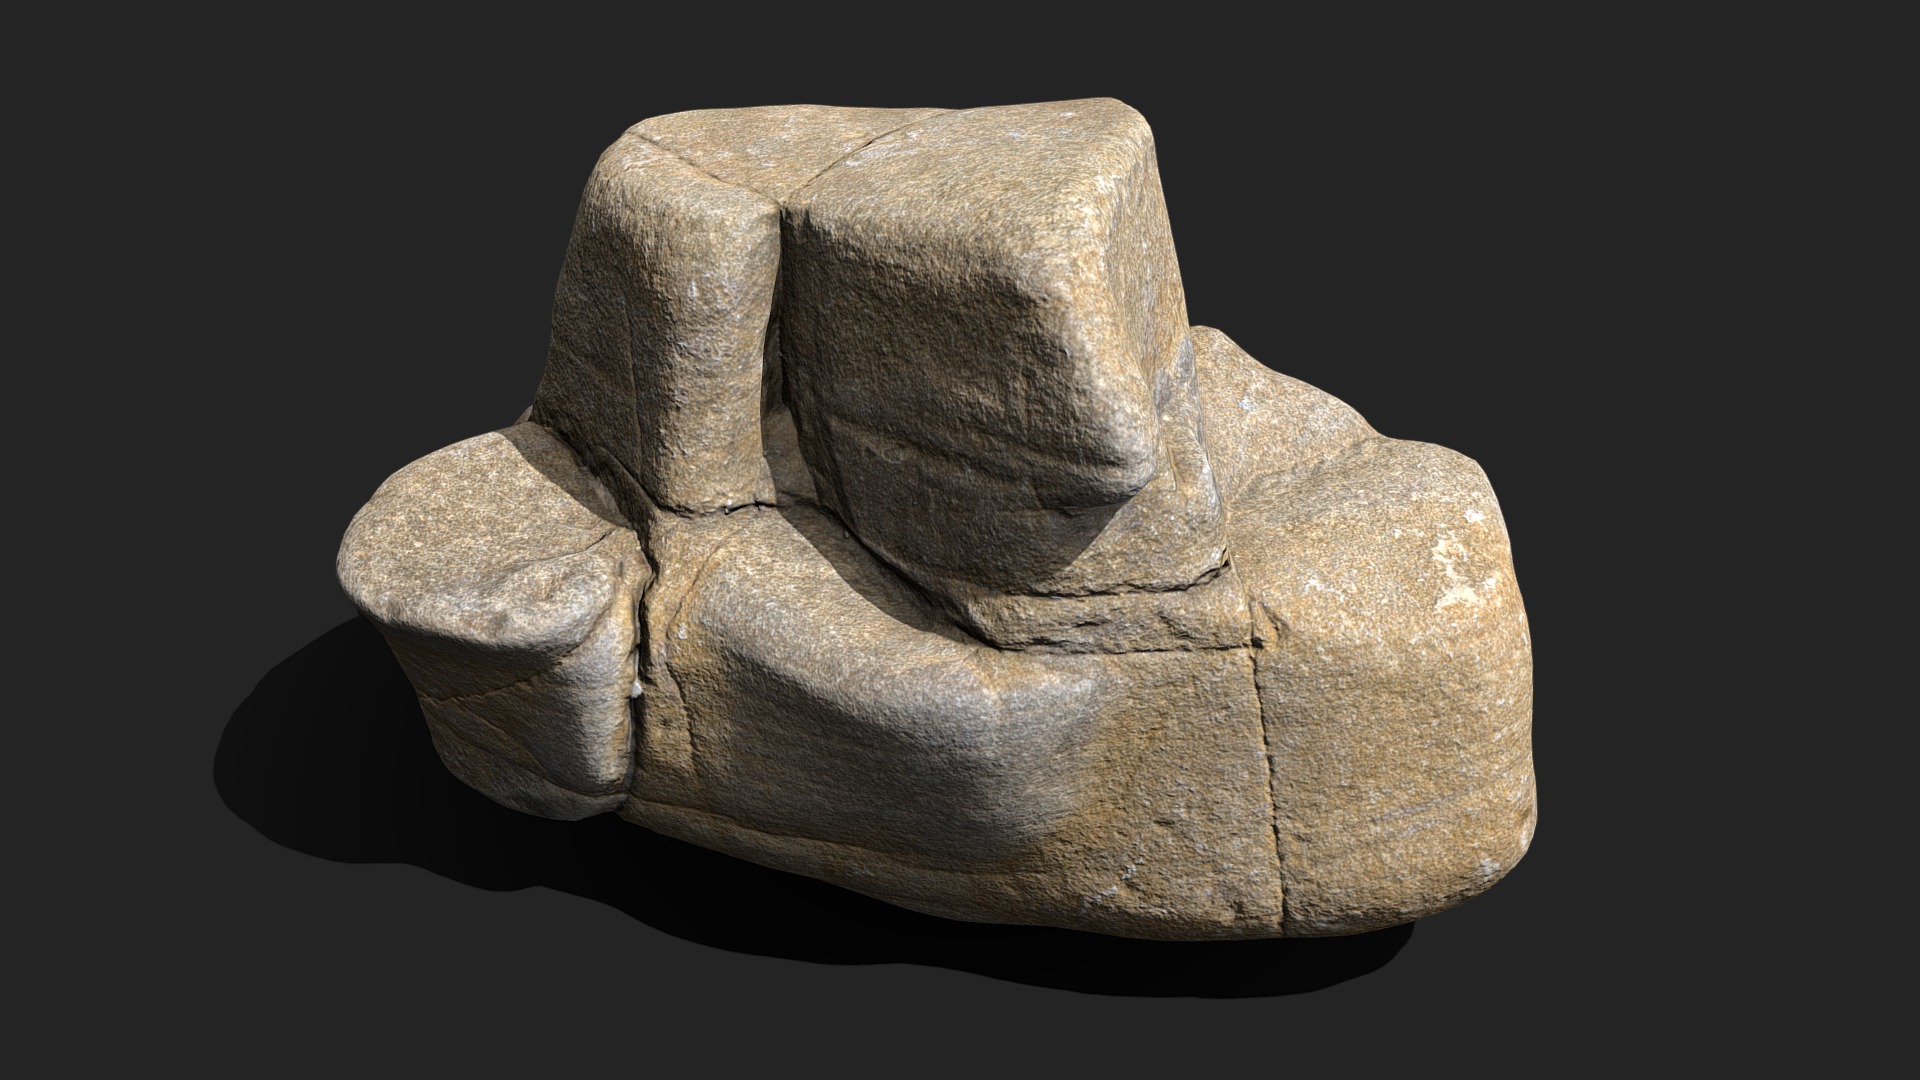 3D model Rock Stone 04 - This is a 3D model of the Rock Stone 04. The 3D model is about a stone sculpture of a head.